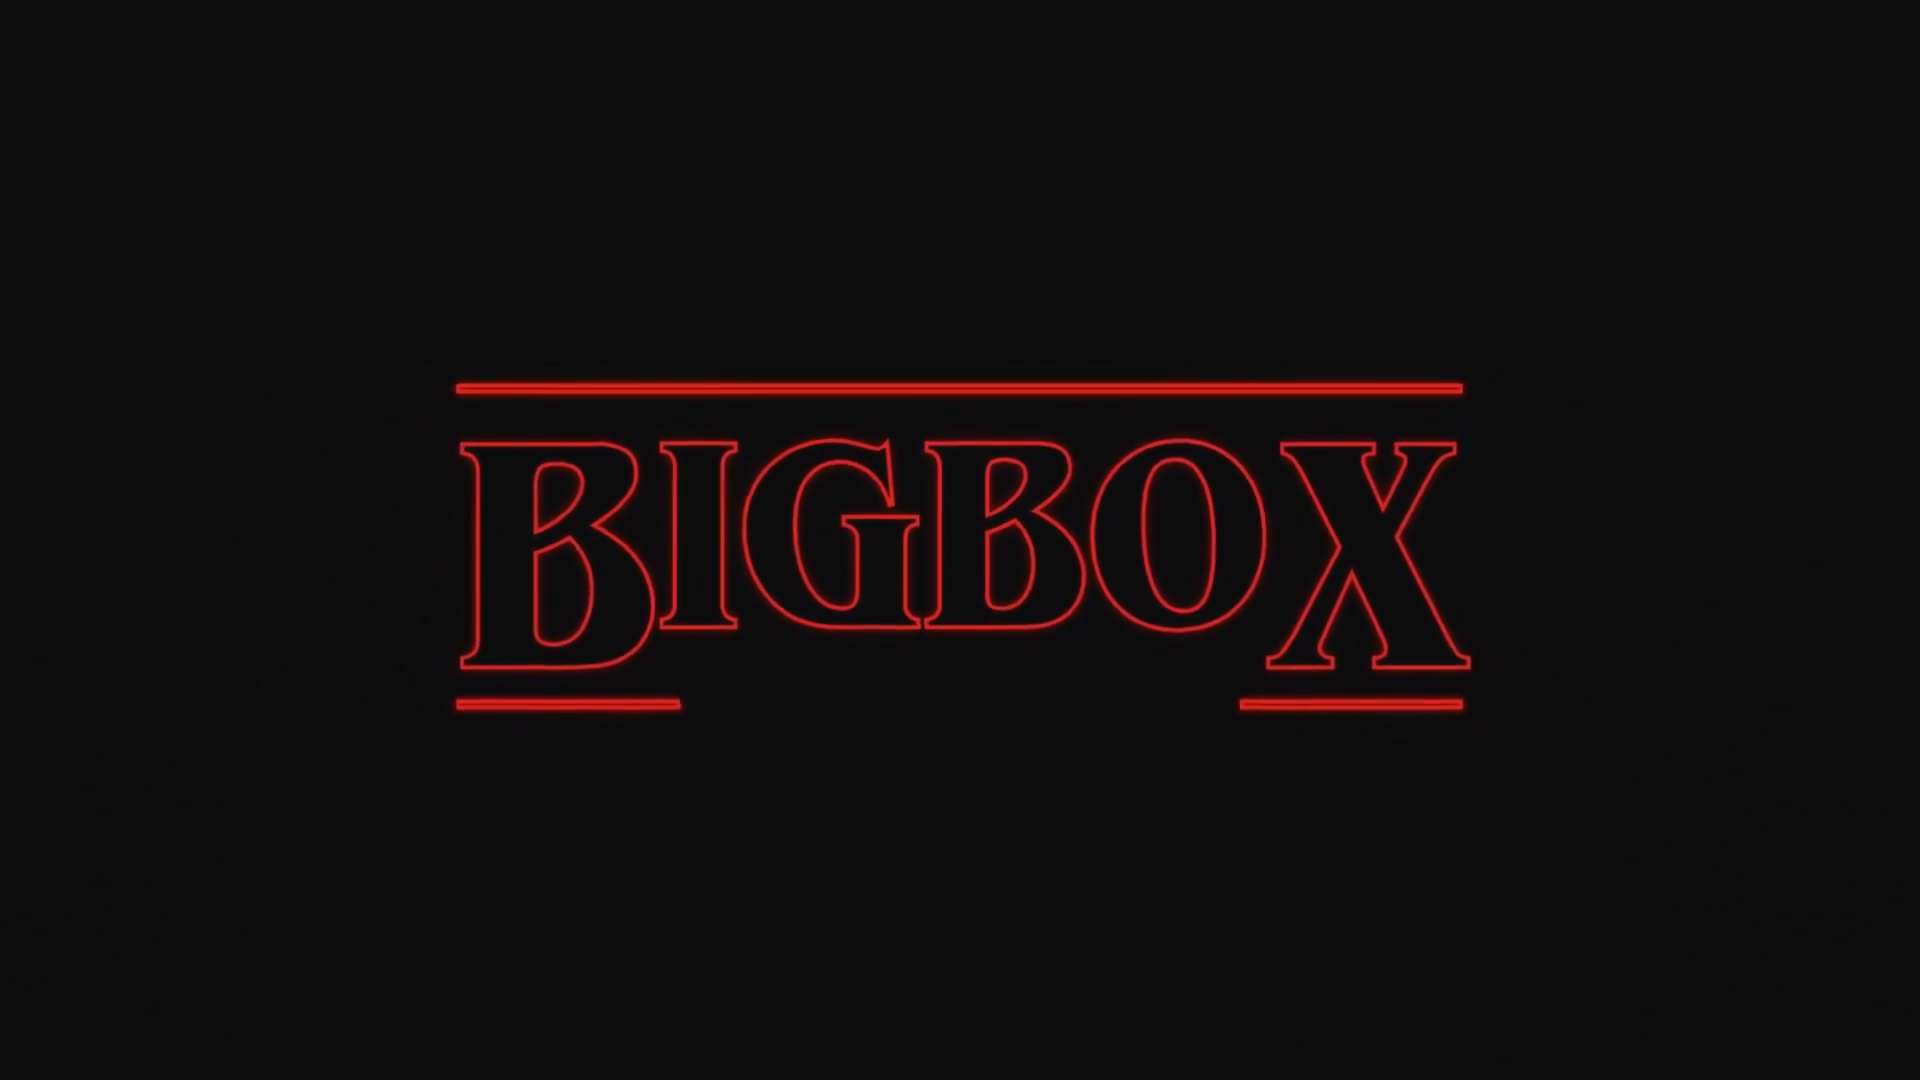 More information about "Stranger Things Big Box Startup Video"